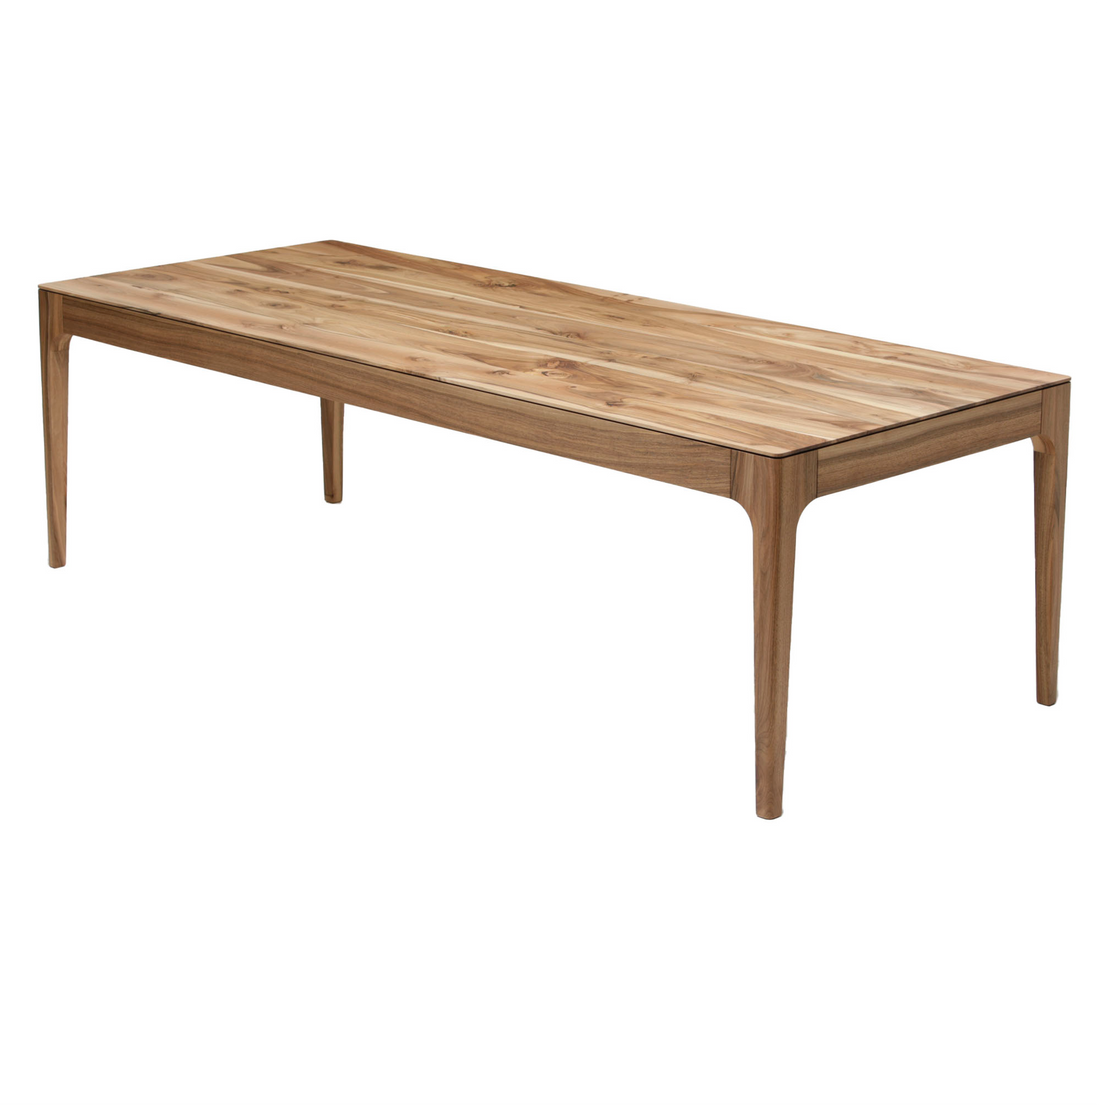 Karolina Walnut 200 x 90cm - 200 x 90cm / 8 Seater / Non-extendable by S10Home